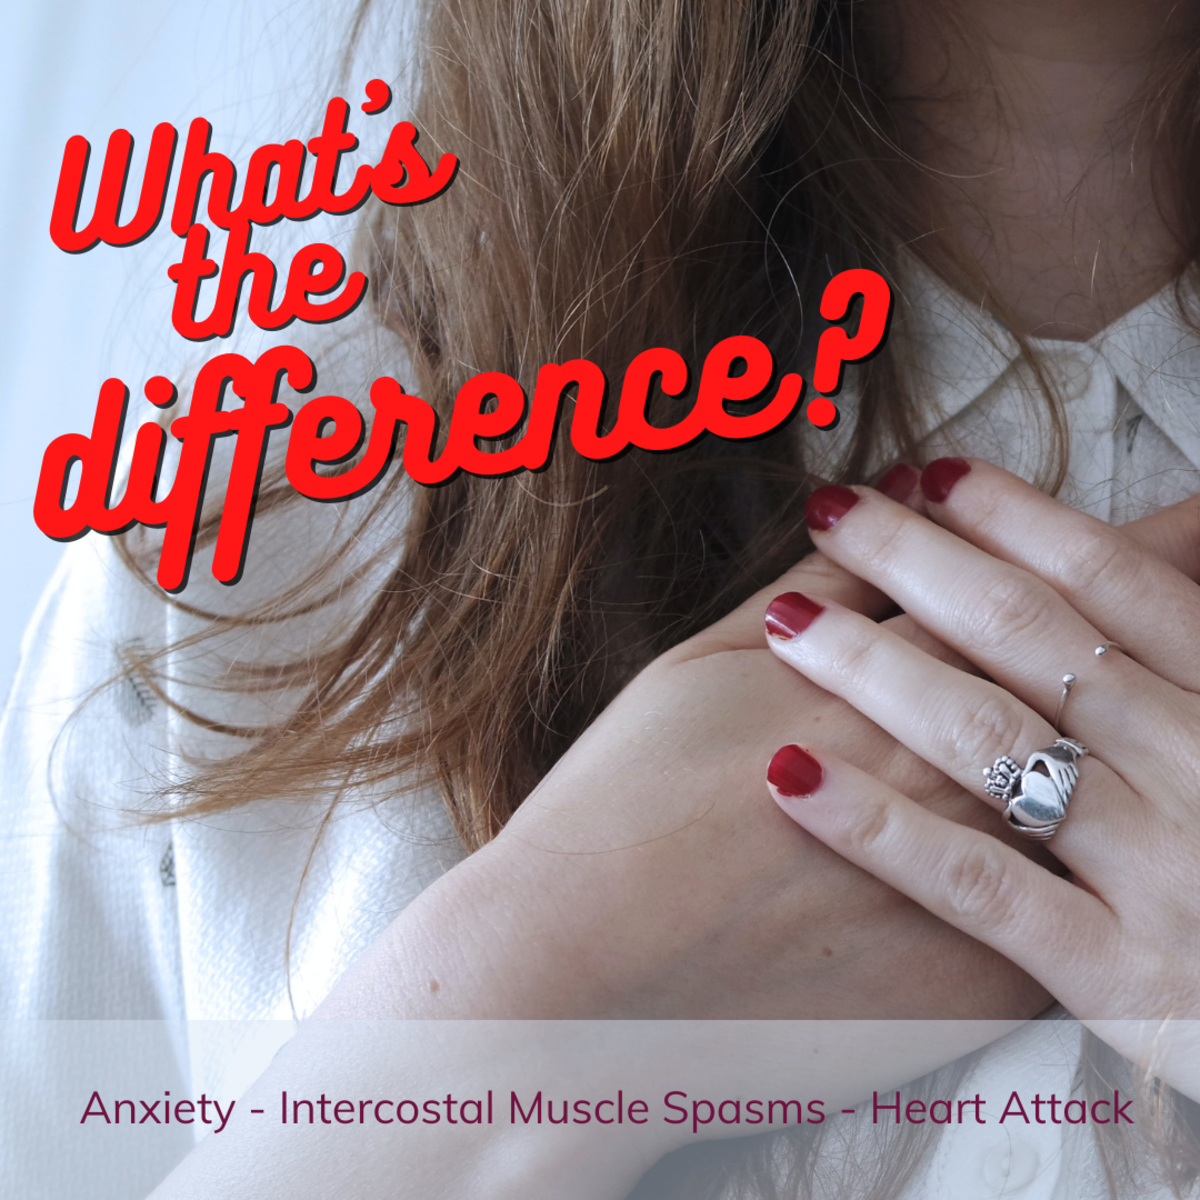 How to Differentiate Between Anxiety, Intercostal Muscle Spasms, and Heart Attack